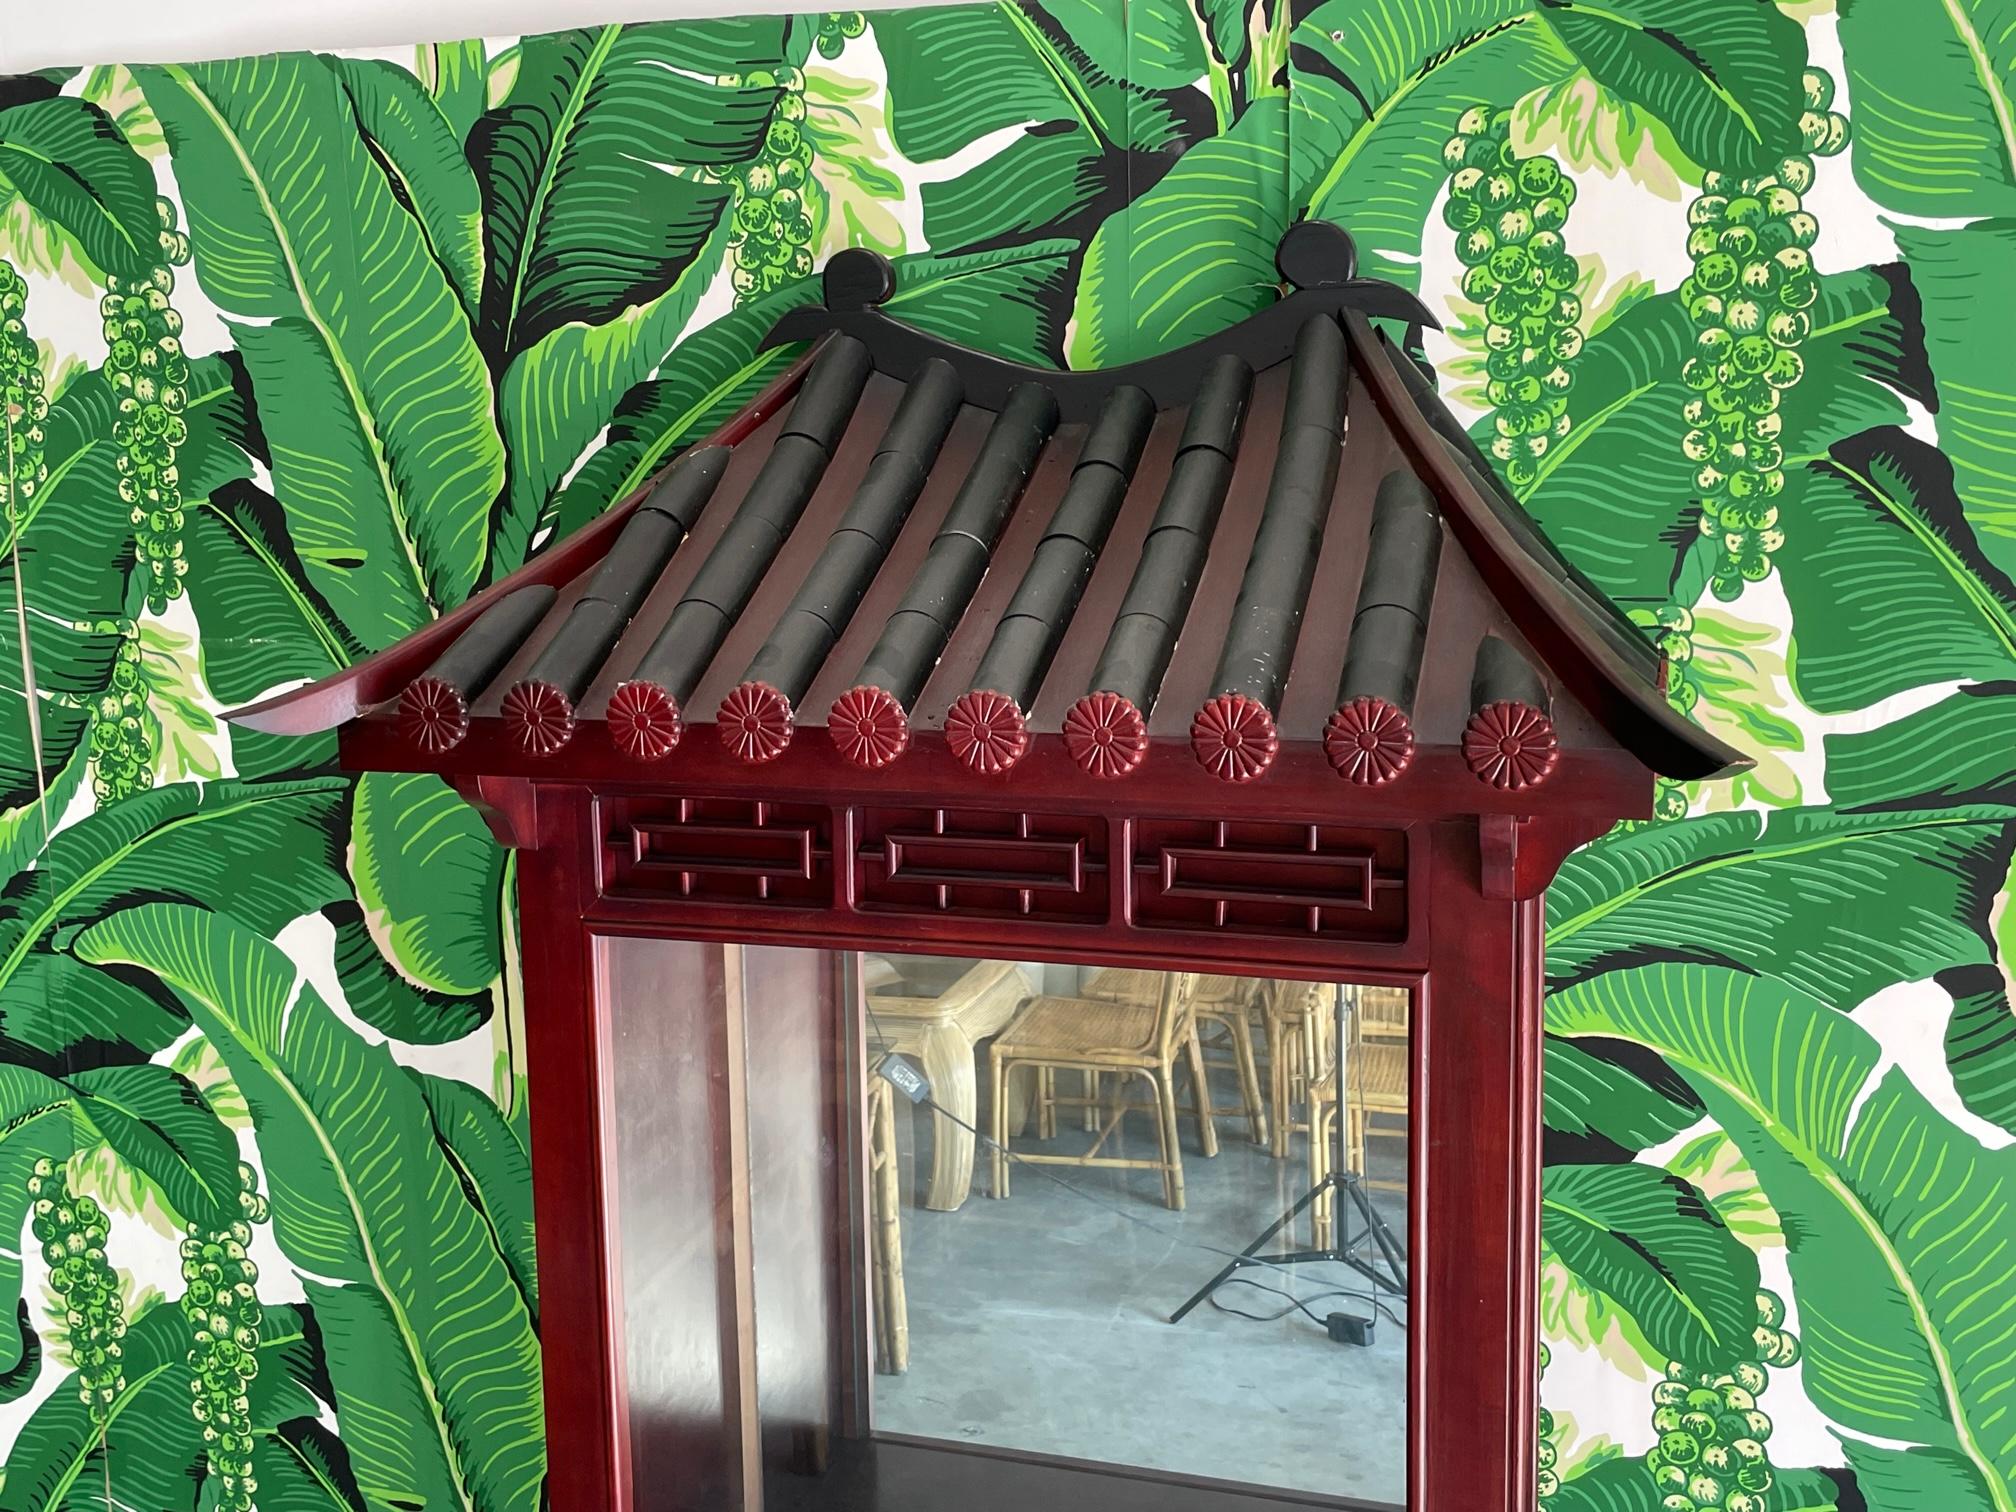 Asian style display cabinet features Chinese pagoda roof and fretwork stand. Interior access from locking side door. One drawer on each side of stand. Good condition with imperfections consistent with age. May exhibit scuffs, marks, or wear, see